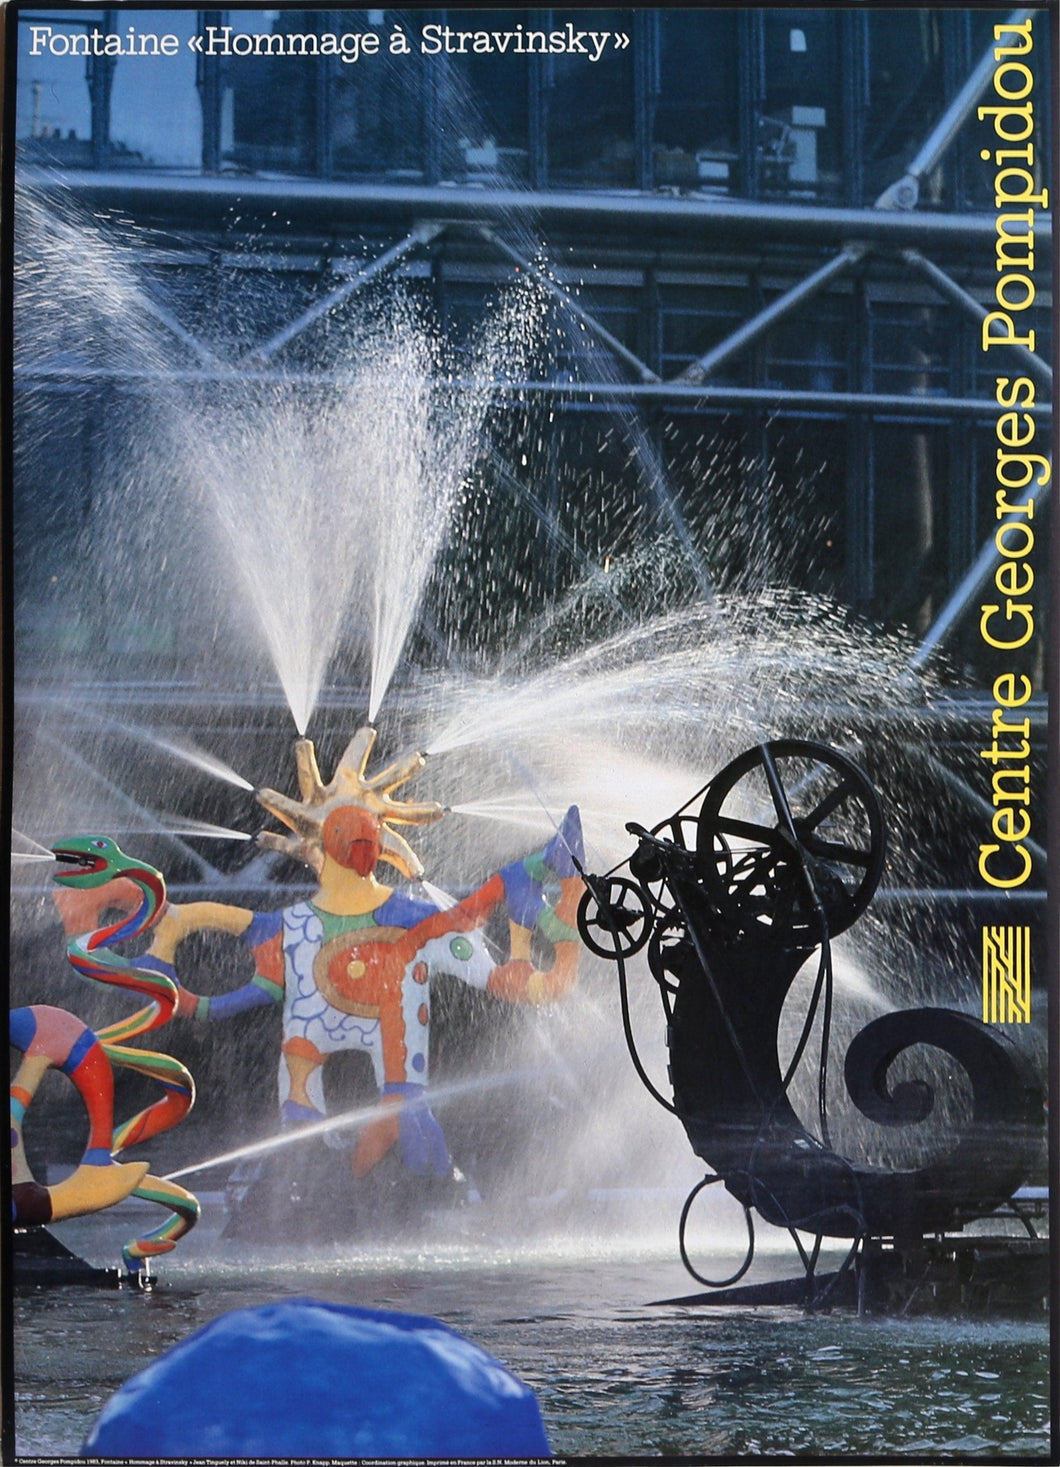 Fontaine: Hommage a Stravinsky - Centre Georges Pompidou Poster | Jean Tinguely and Niki de Saint Phalle,{{product.type}}